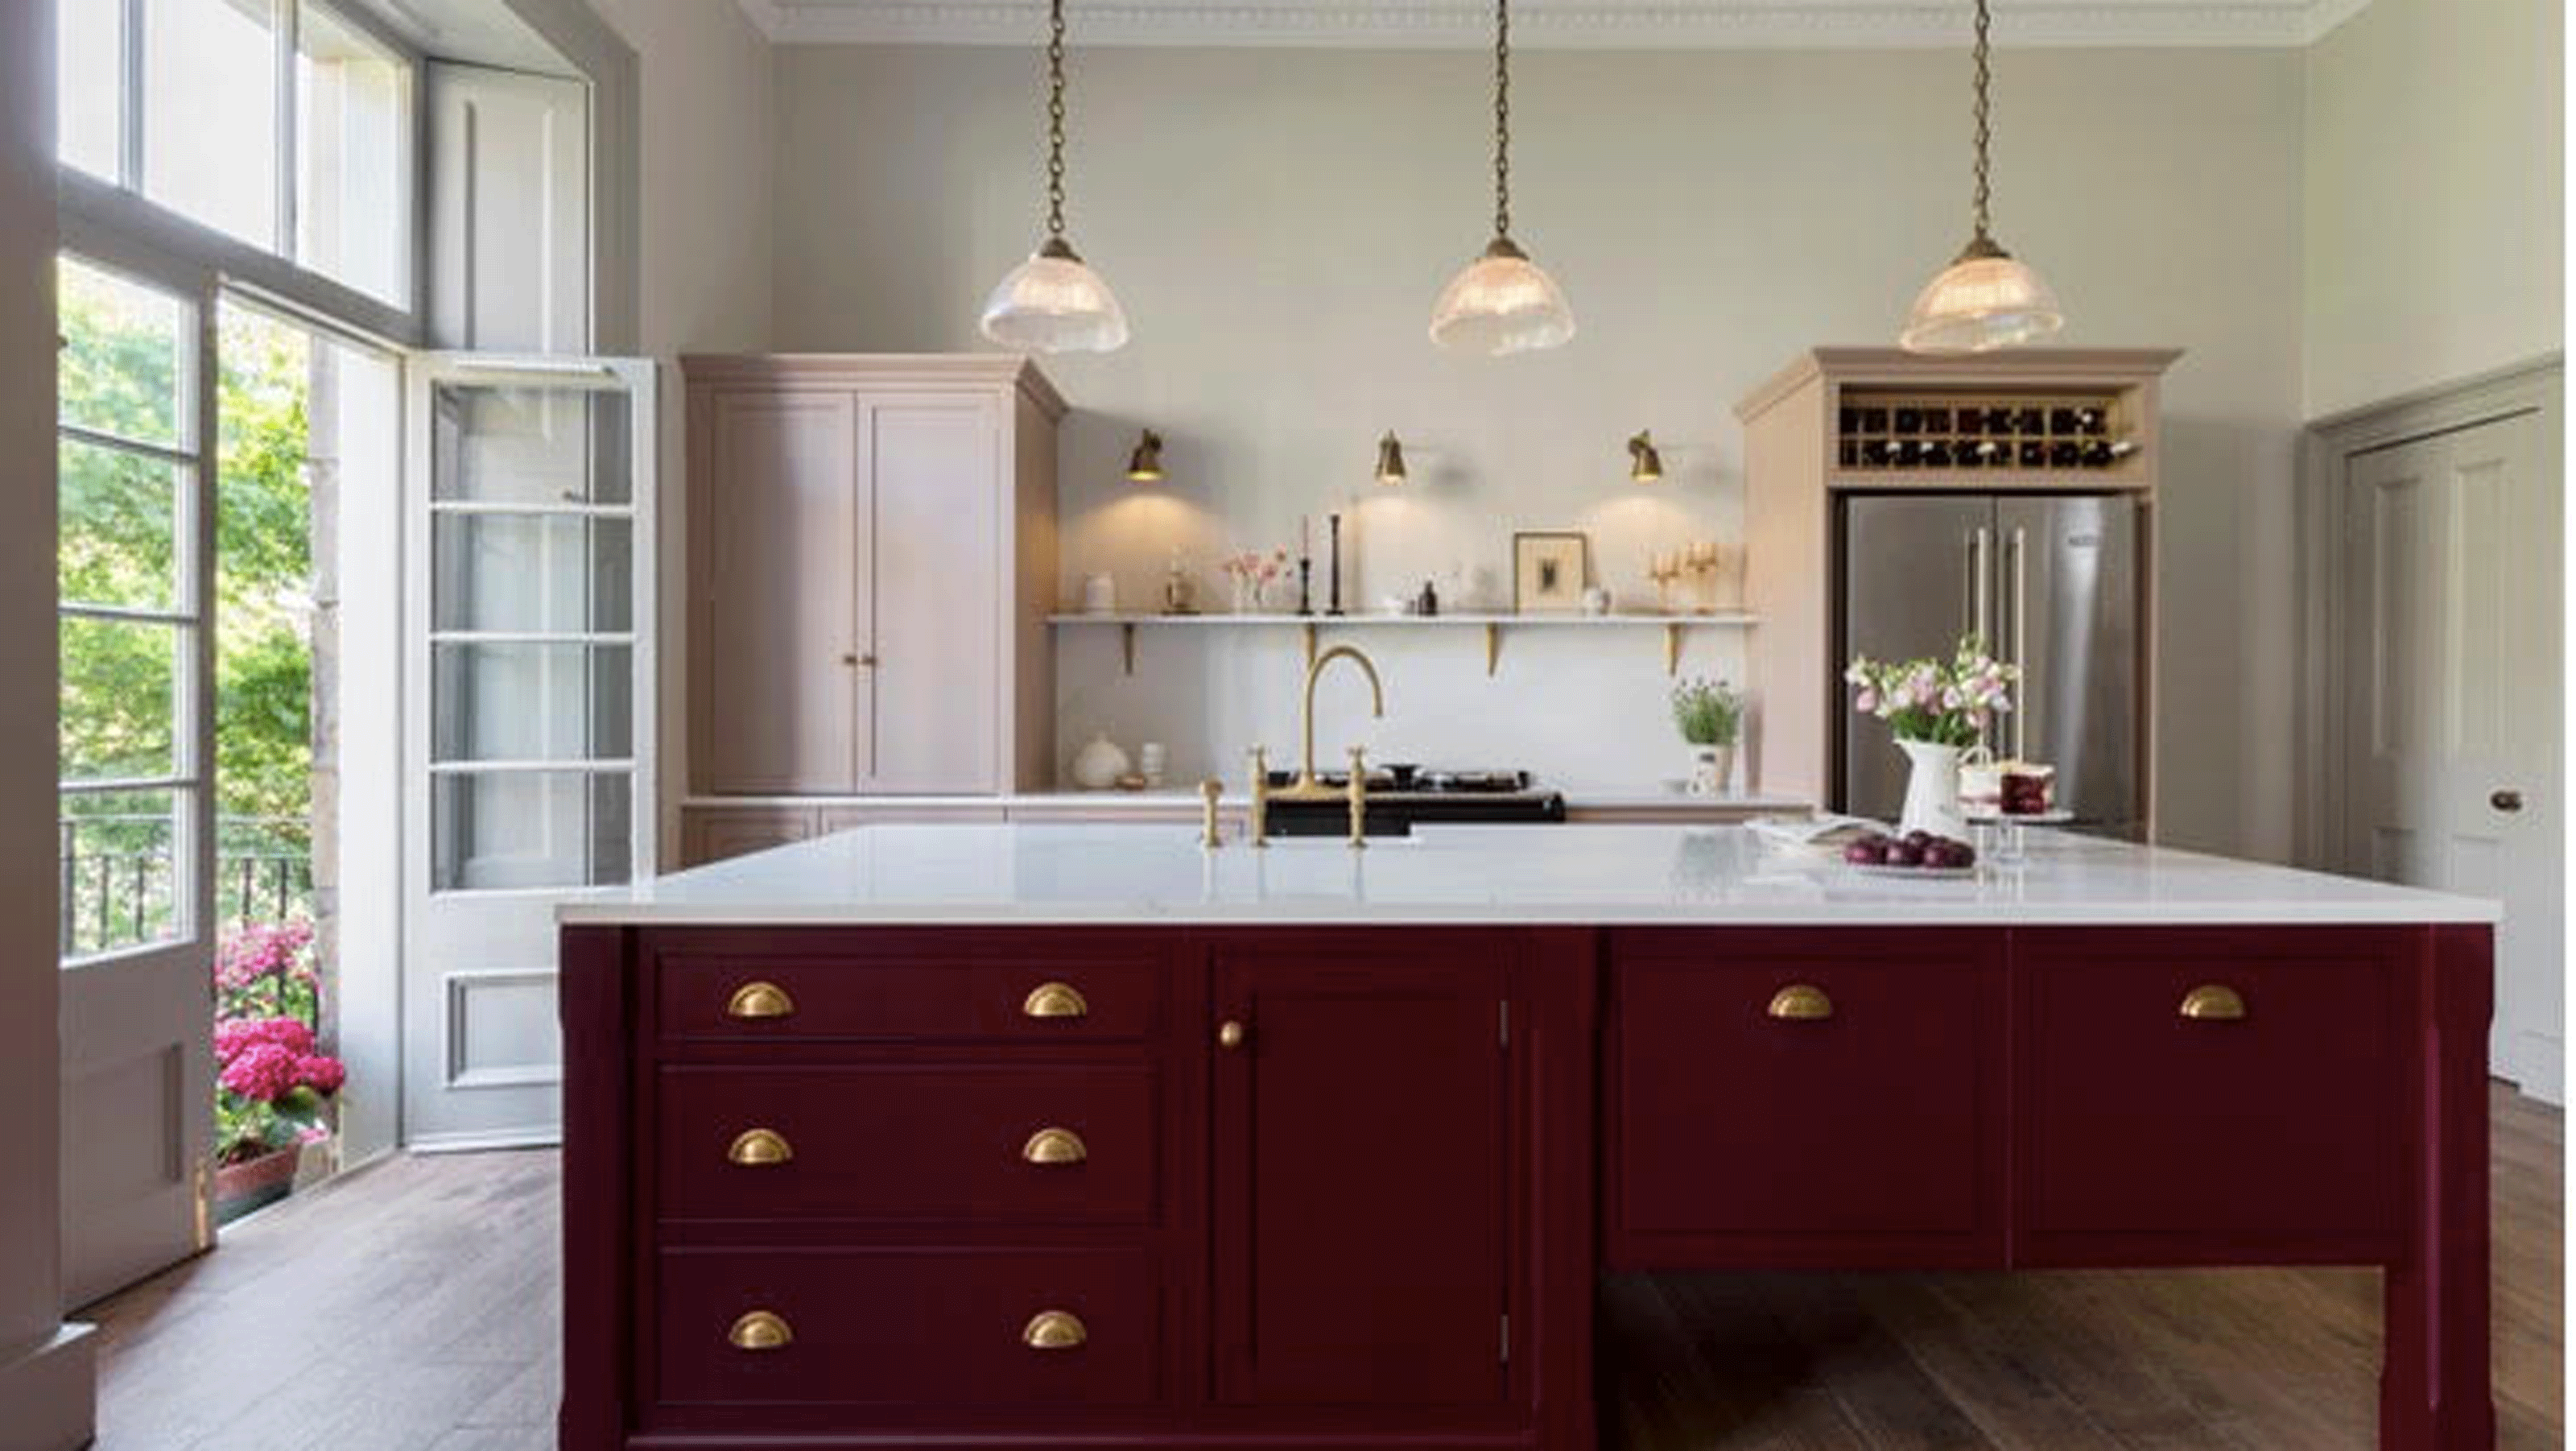 How to reset a smart bulb kitchen with red island and trio of pendant lights